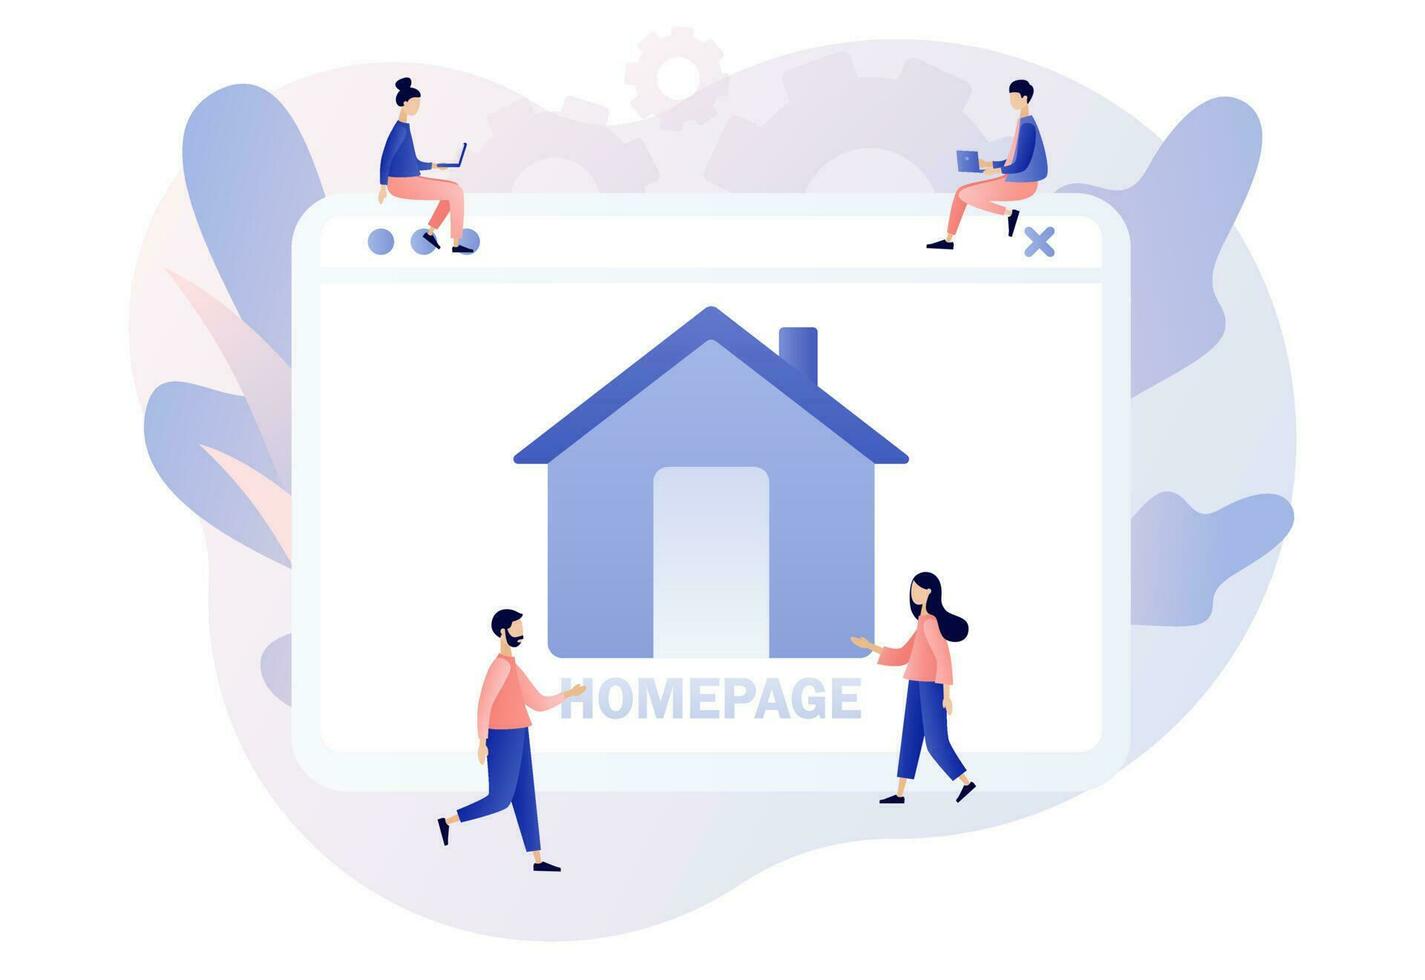 Homepage - web page design. Tiny people working on website homepage development, optimization, setup. Modern flat cartoon style. Vector illustration on white background